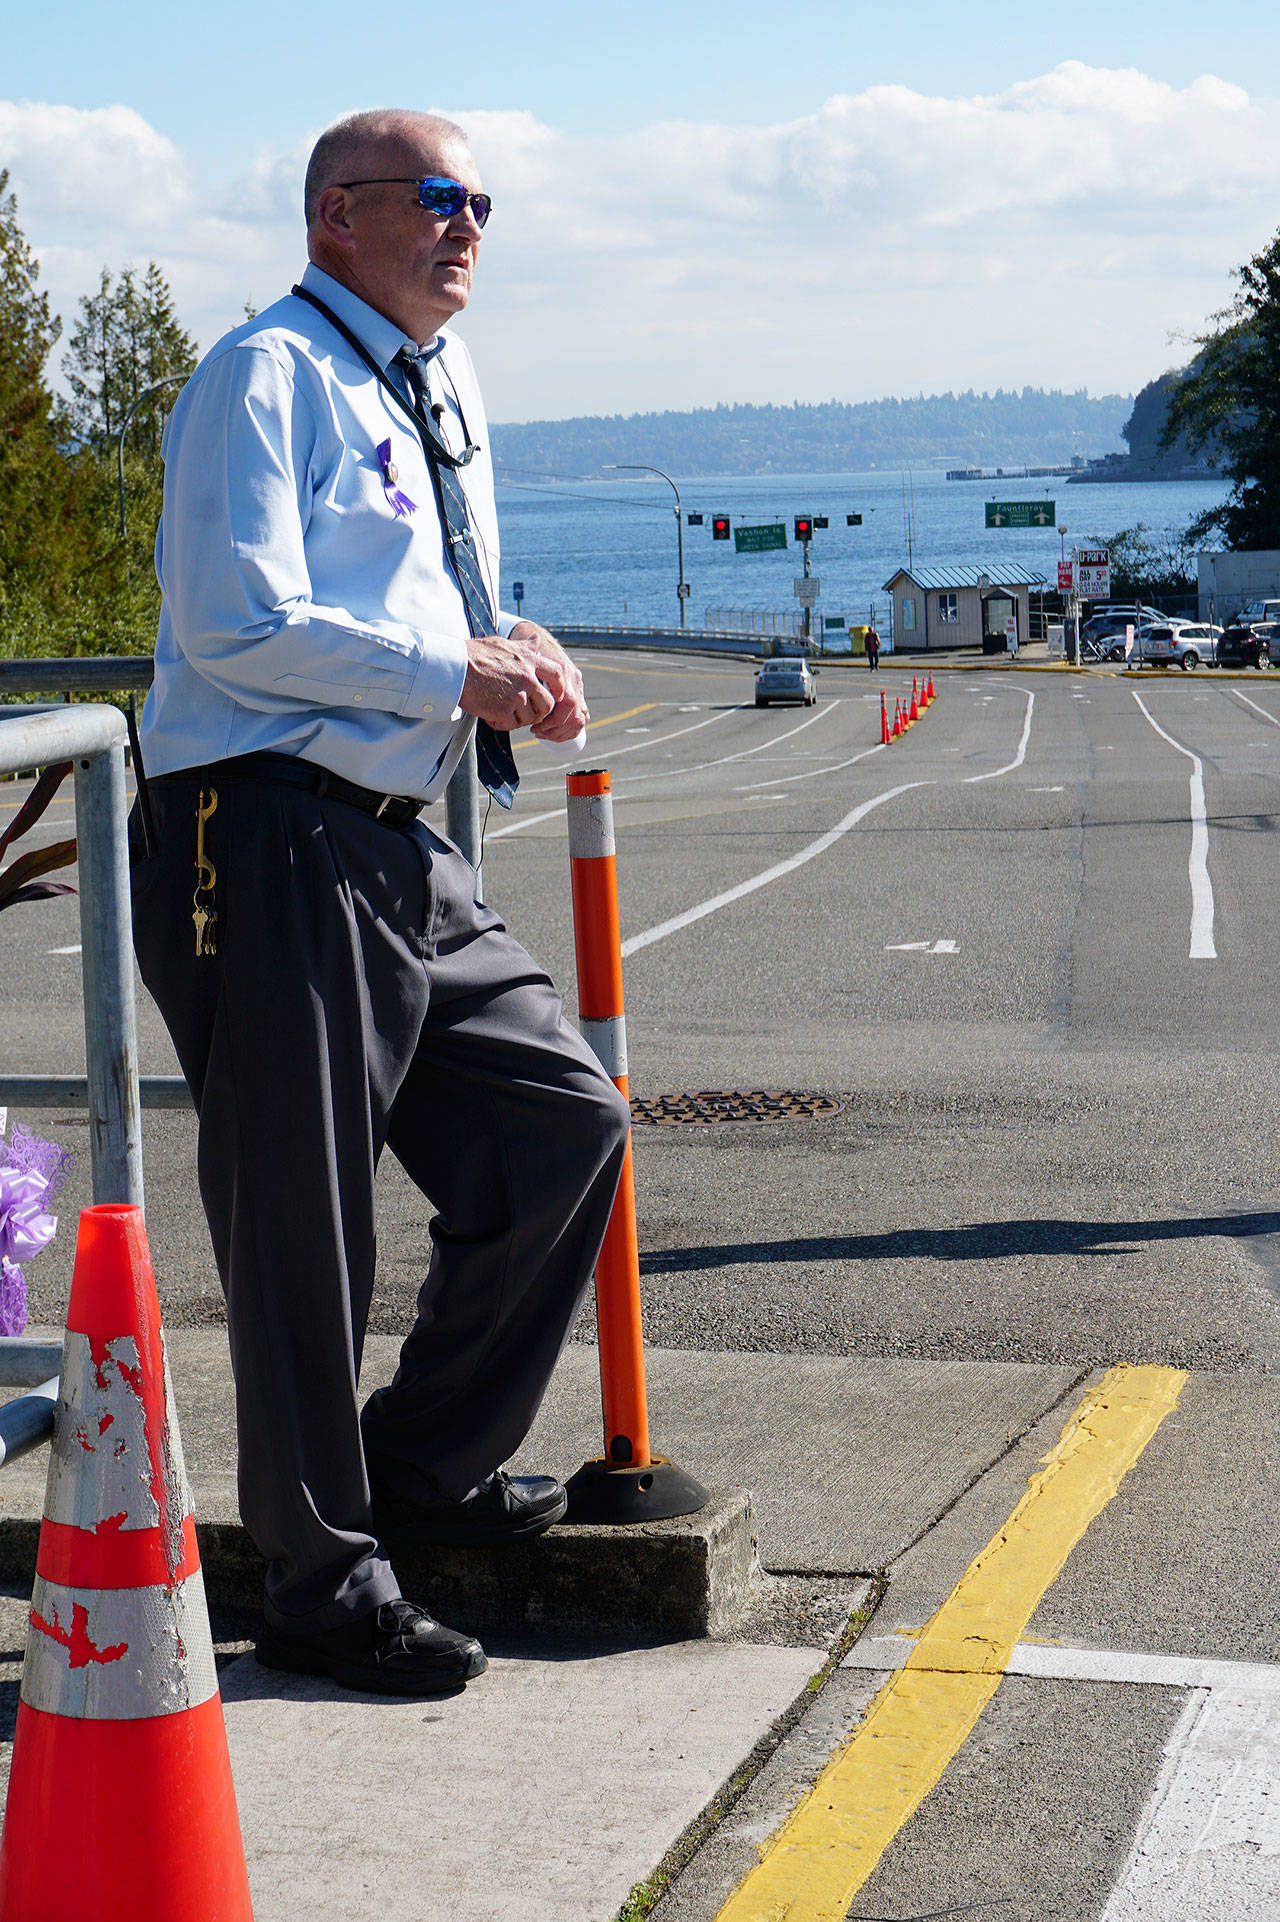 Phil Olwell, Washington State Ferries Southworth Terminal supervisor, shares his memories of Katie Phillips at the memorial event. (Bob Smith | Kitsap Daily News)